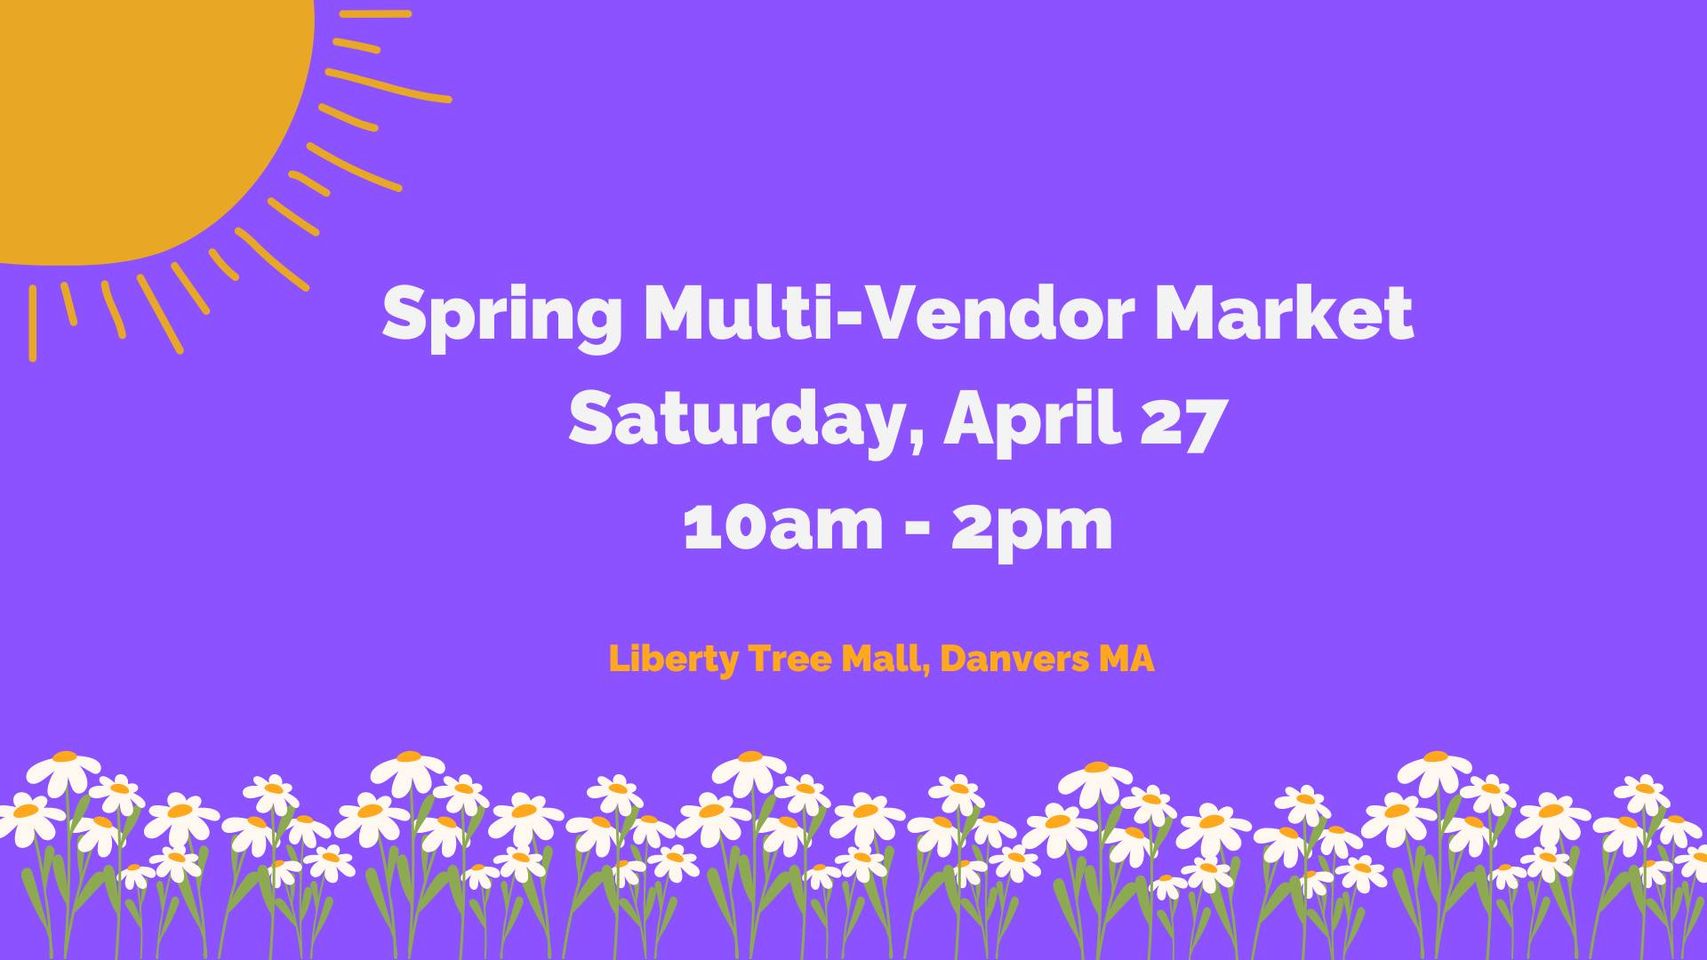 Join us on Saturday, April 27 from 10 am to 2 pm in the Liberty Tree Mall, Danvers MA for our Spring Multi-Vendor Market Event! Surround yourself with lively purple hues and blossoming spring-themed designs at this unique shopping experience. Don't miss out - reconnect with your local community and explore a wide range of products from various vendors!